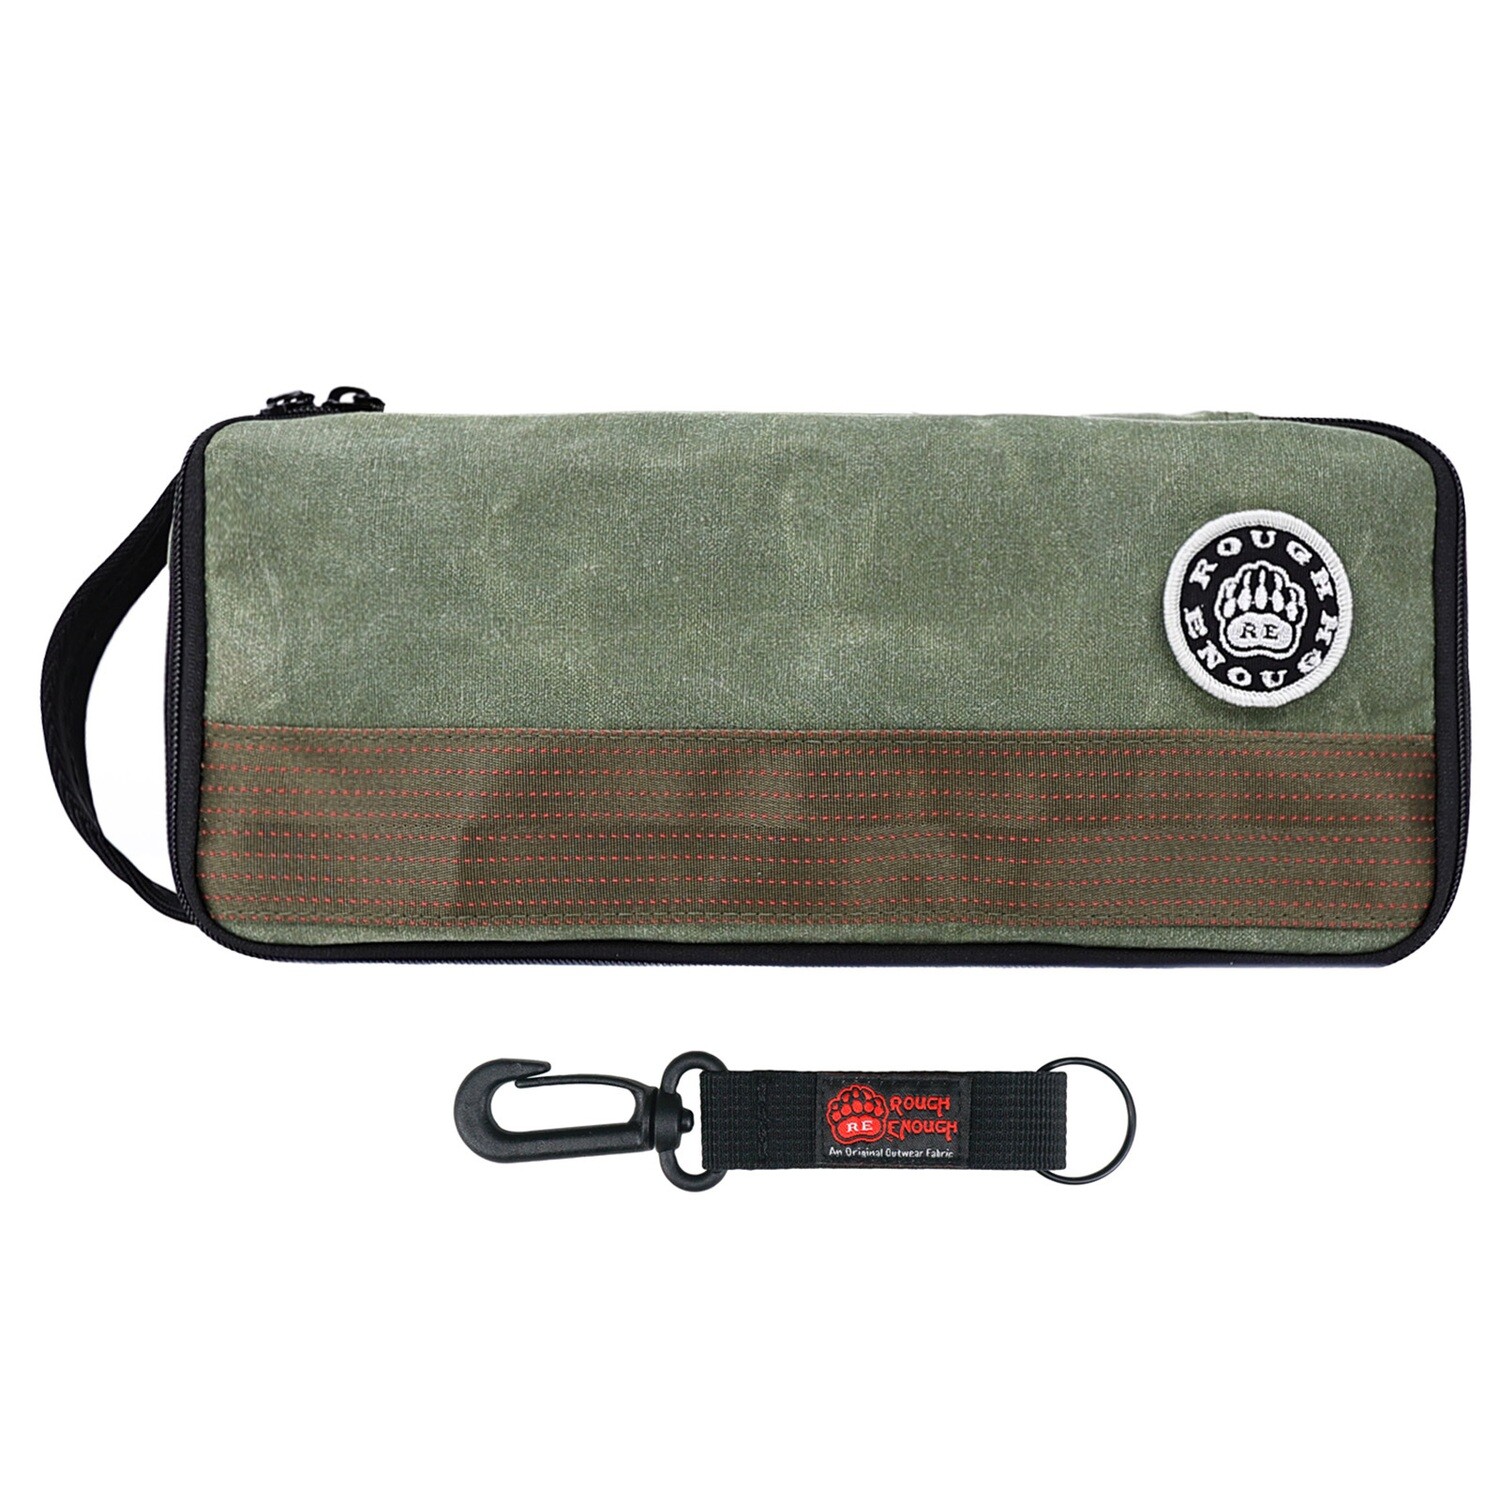 Rough Enough Small Tool Bag Canvas Tool Bag with Handle for Tactical Camping Gear